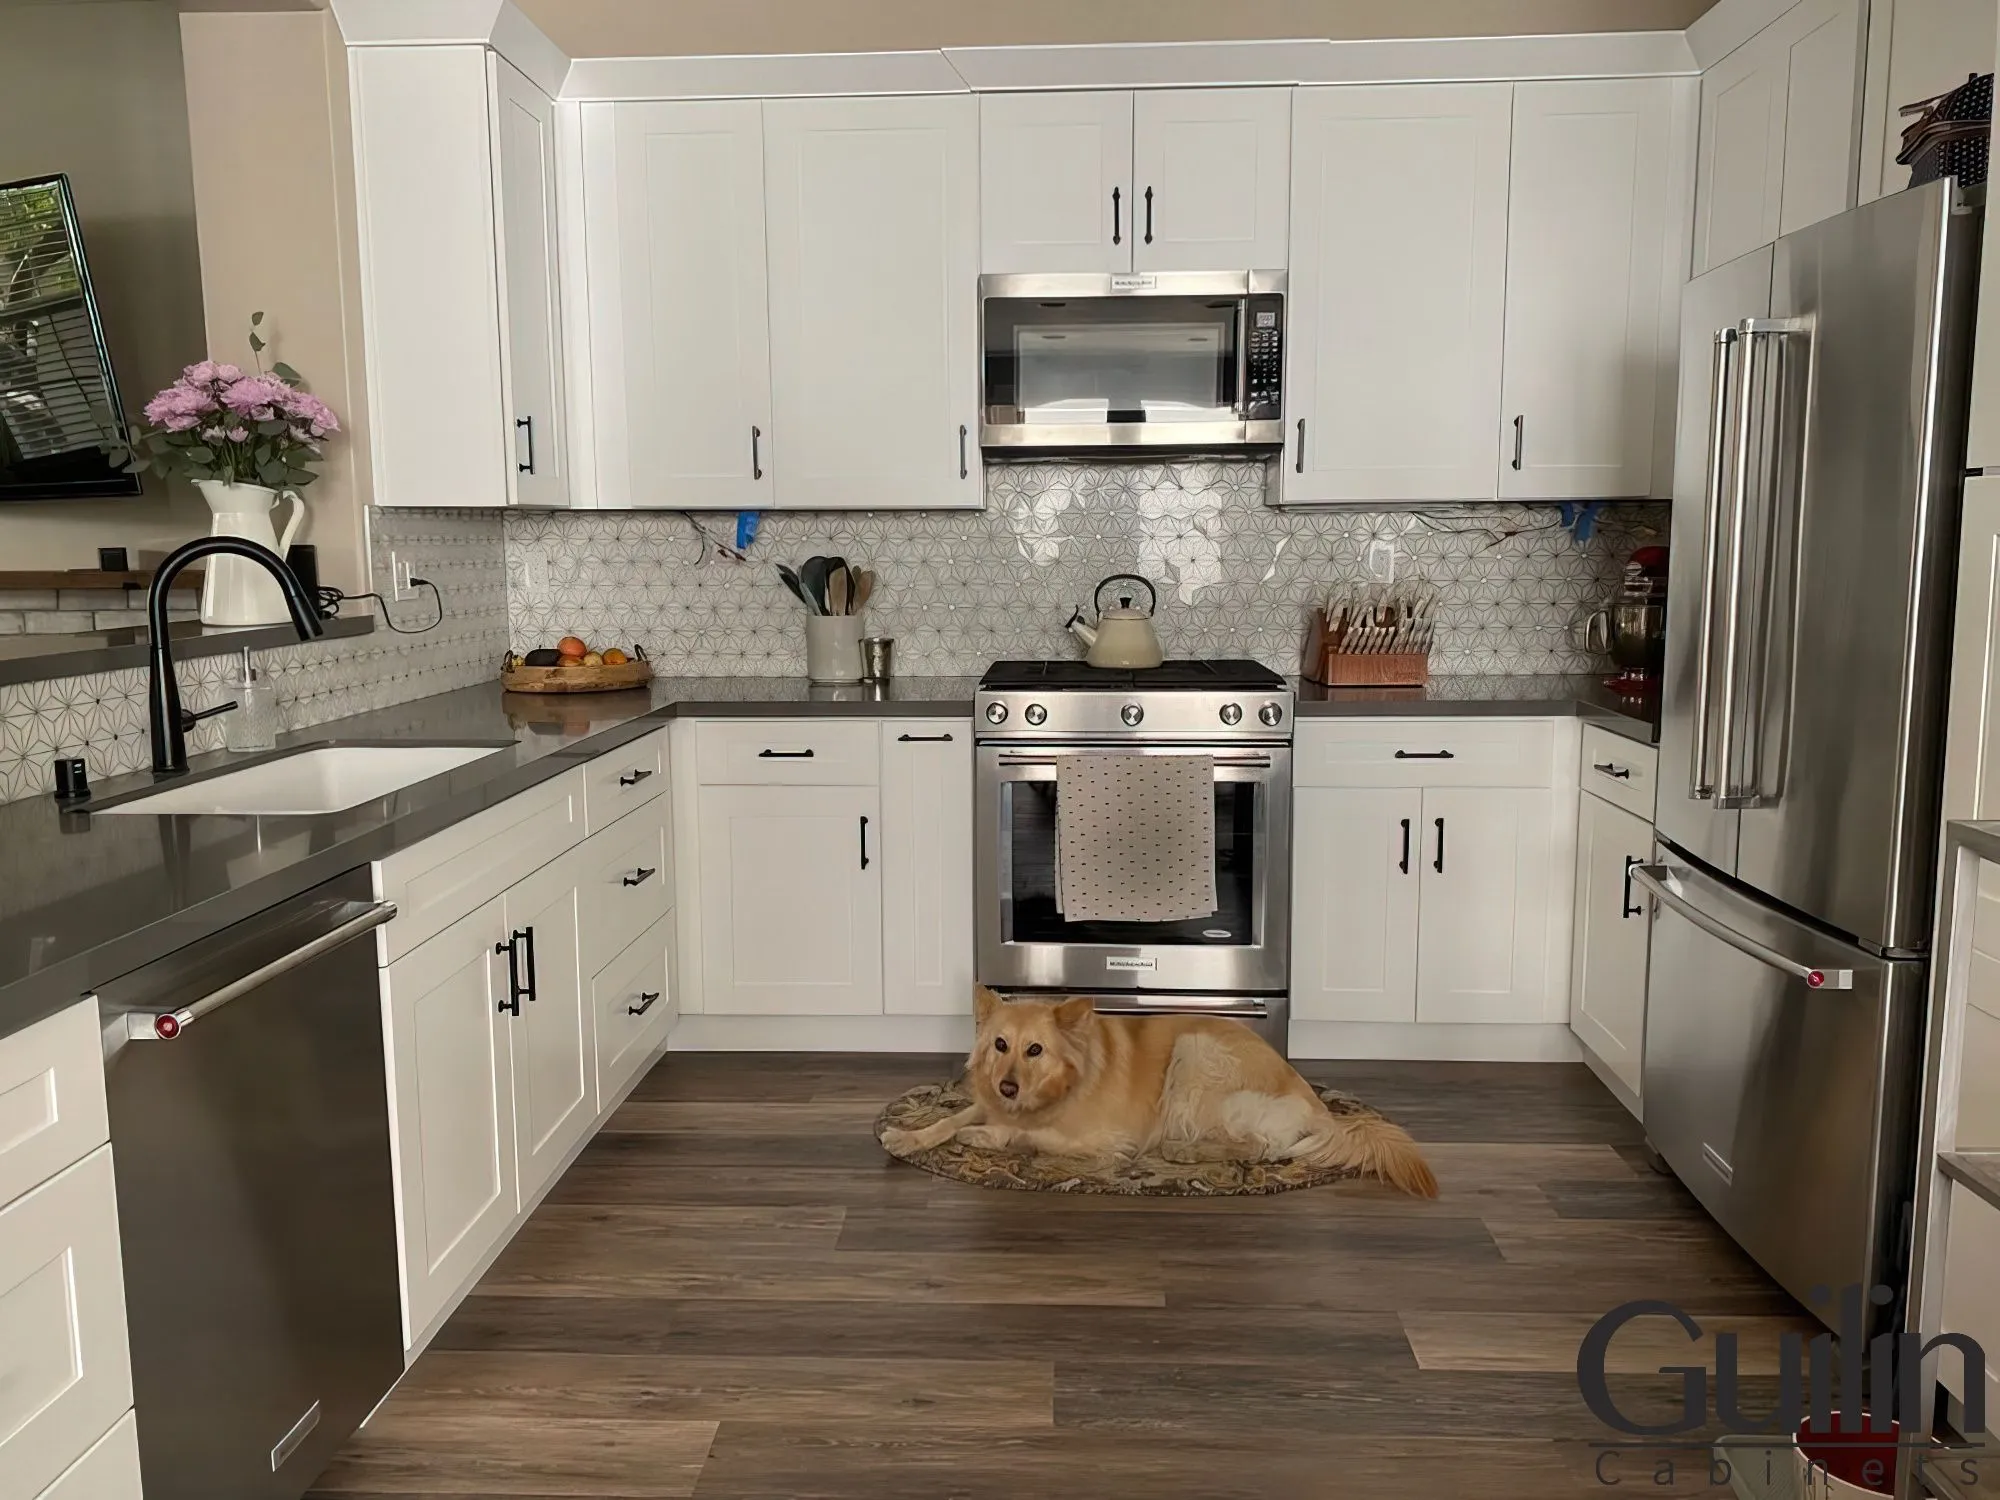 A U-shaped kitchen layout is a popular layout choice among homeowners and designers. It’s a great way to make efficient use of space, allowing for a more organized and efficient kitchen - Remodel Transition Kitchen with Gorgeous Backsplash in Irvine, CA By Guilin Cabinets